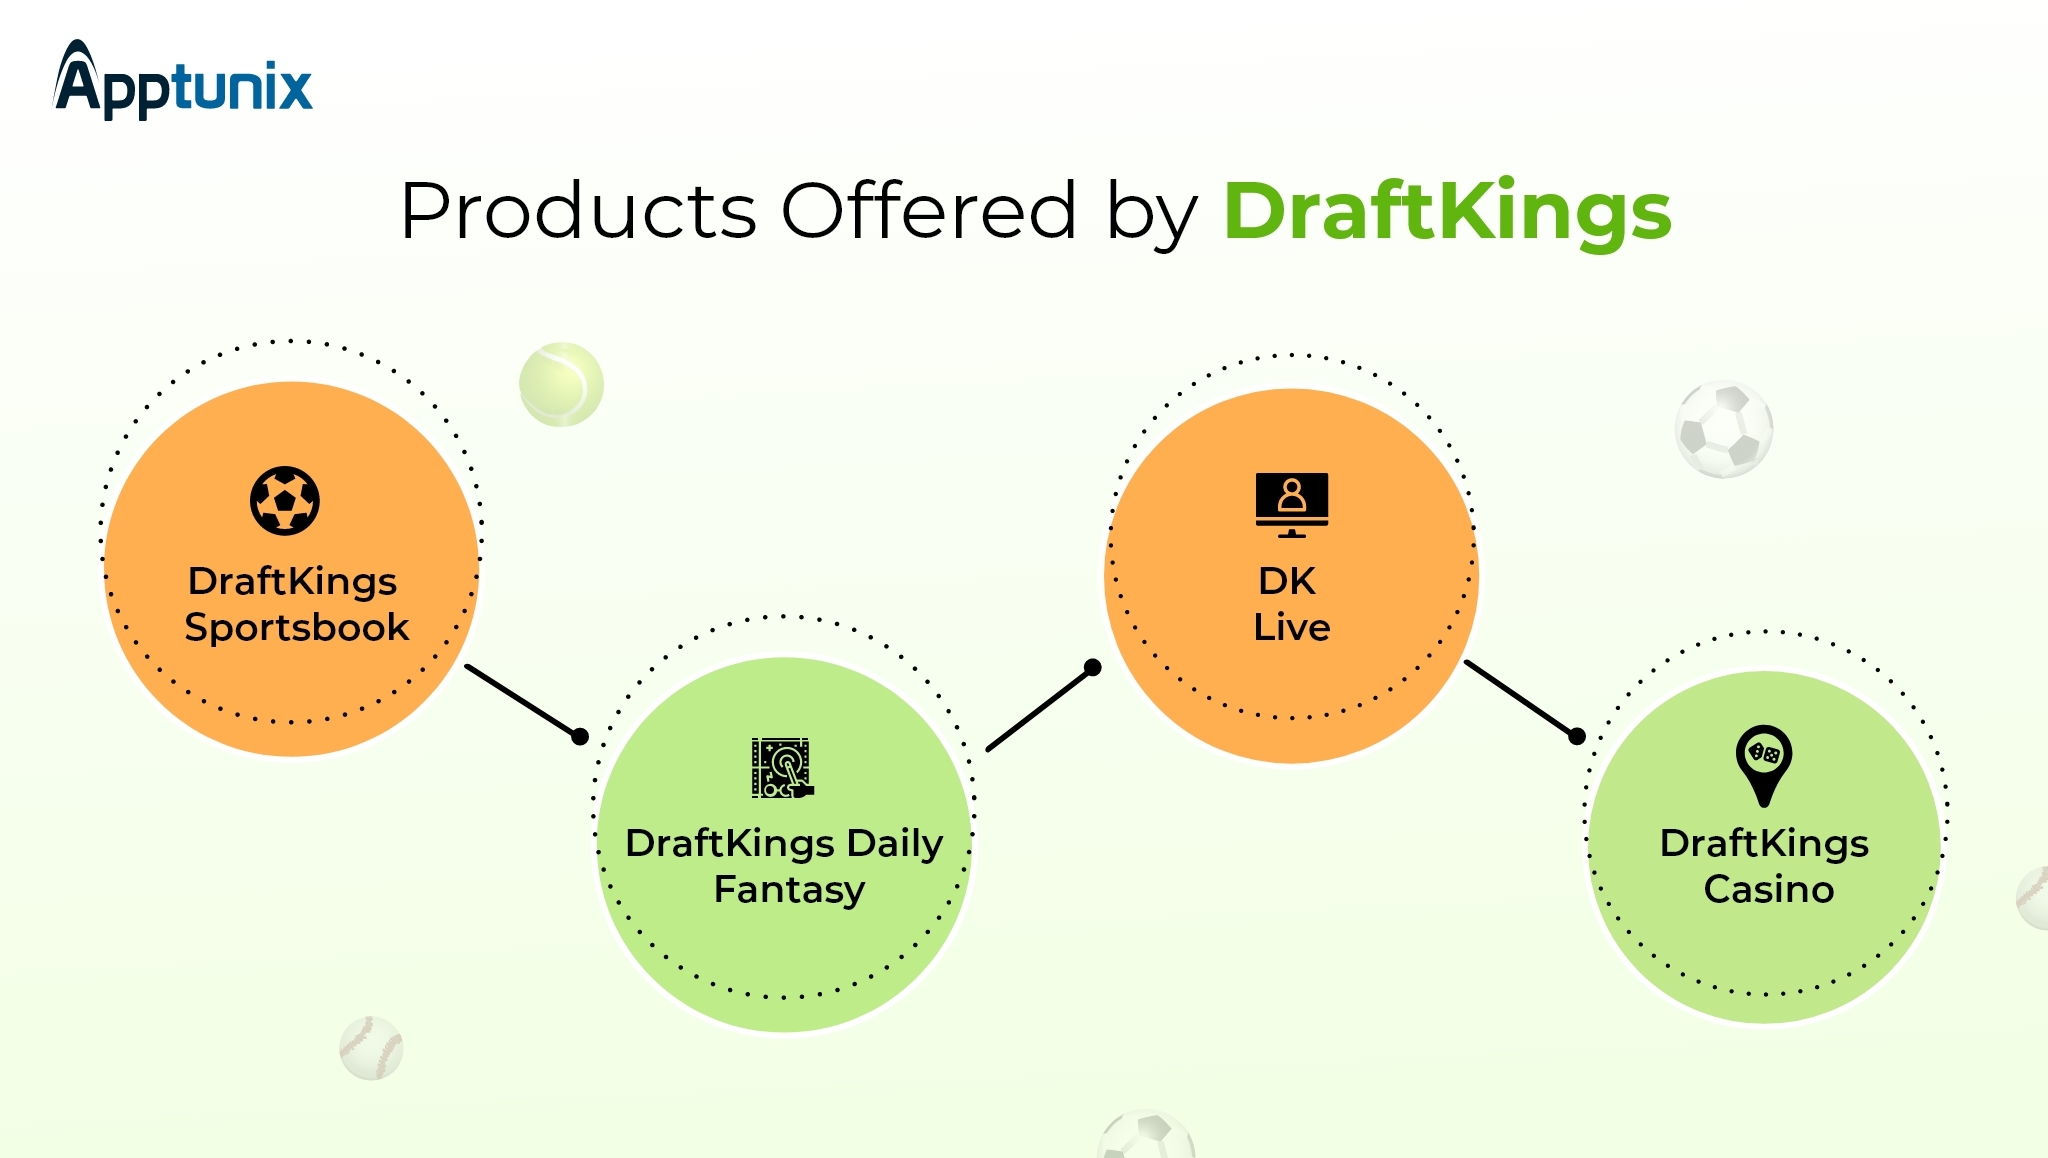 DraftKings business model